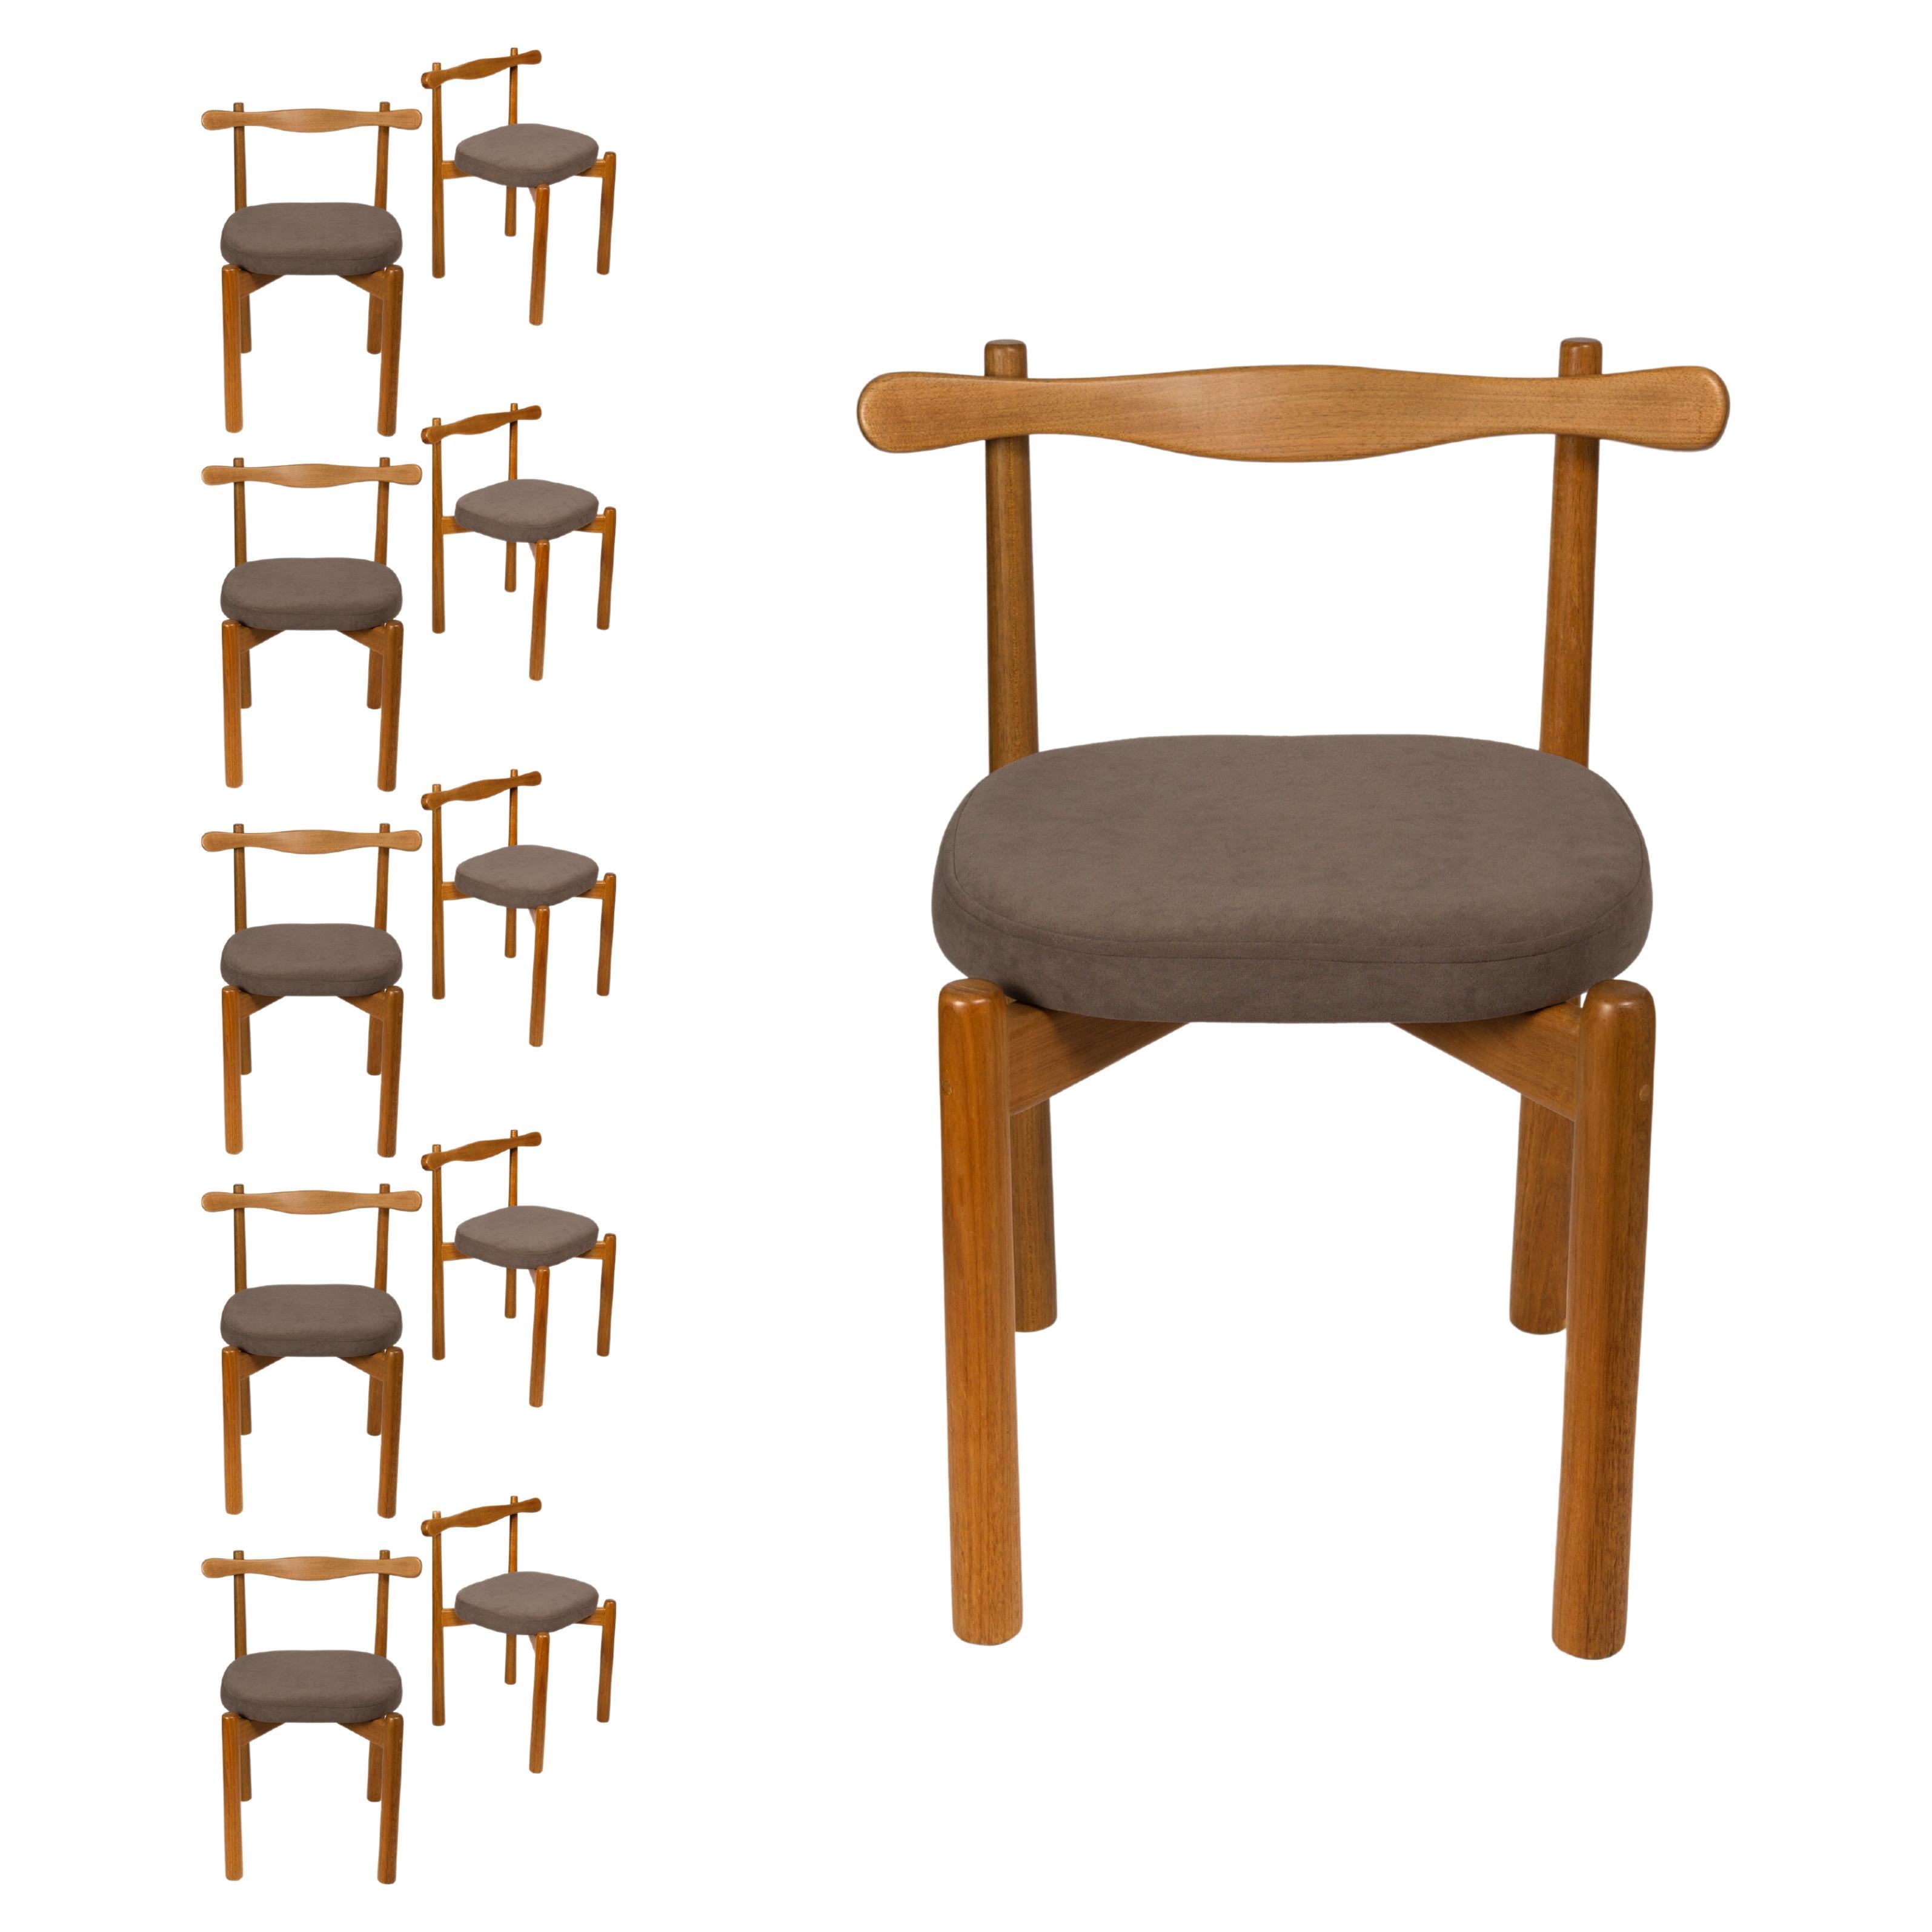 Set of 10 Dining Chairs Uçá Light Brown Wood (fabric ref : 20)